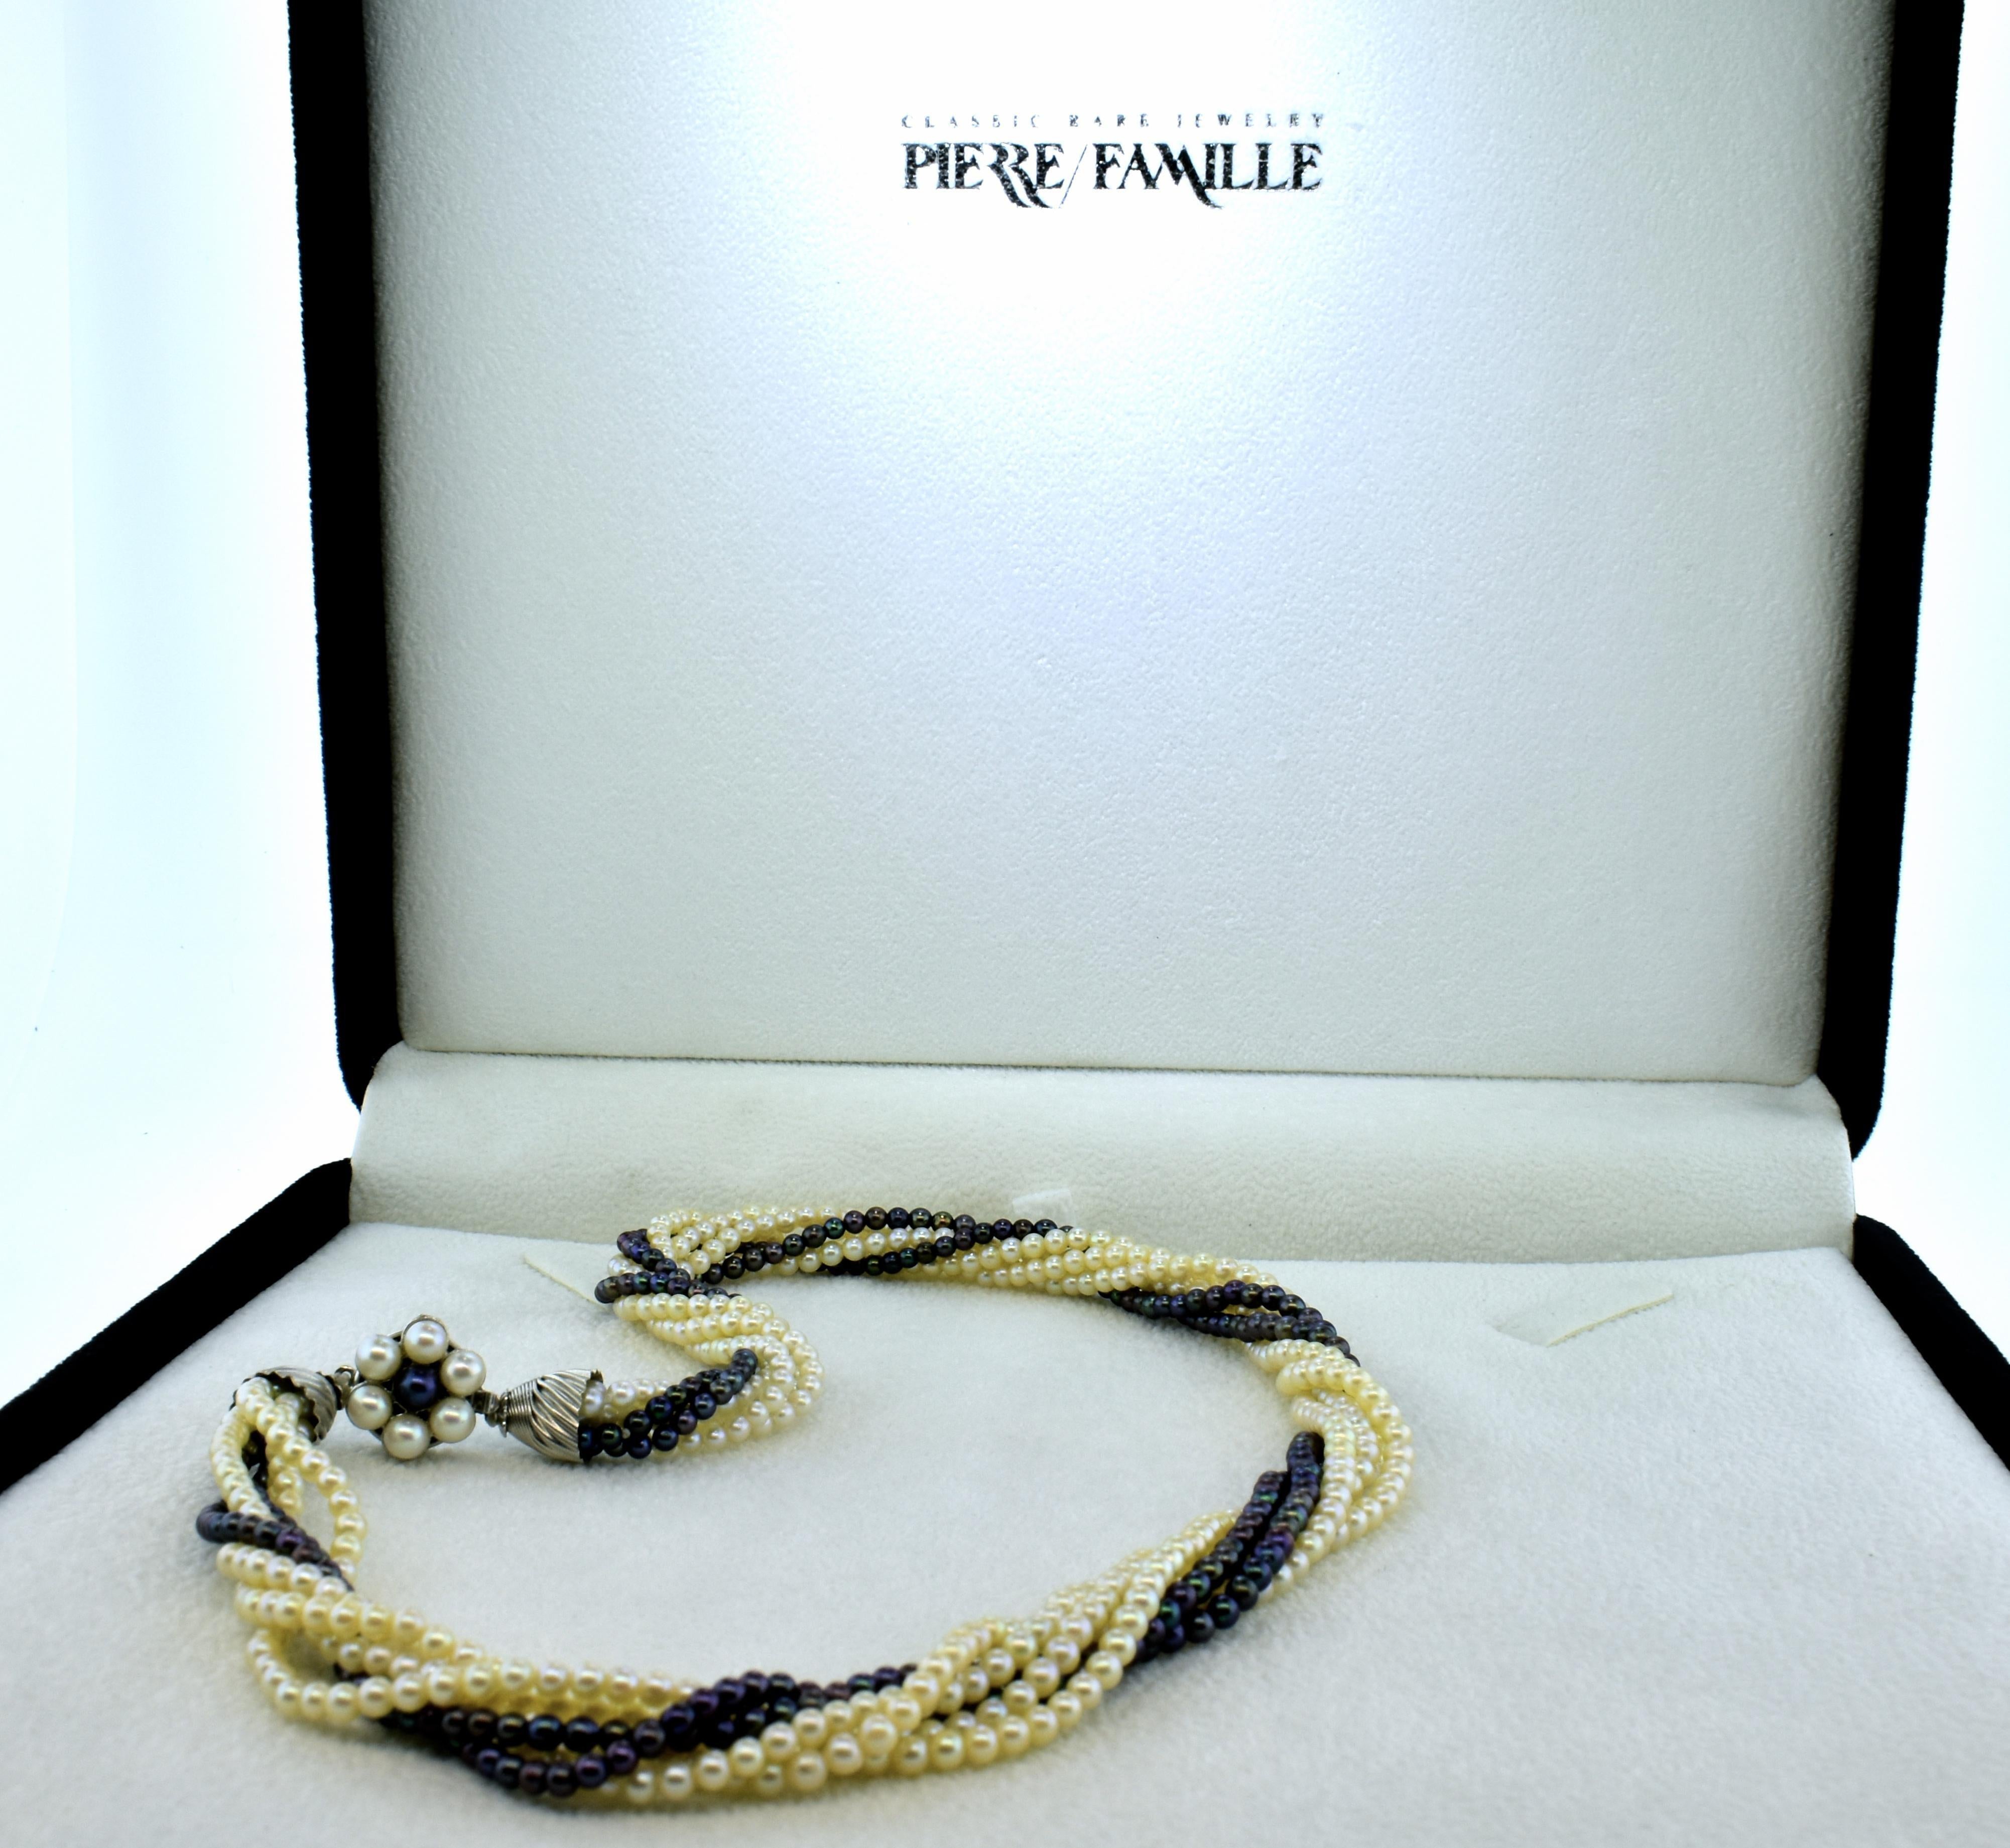   White and Black Akoya Pearls w/ a fancy white gold clasp/pendant, Contemporary For Sale 3